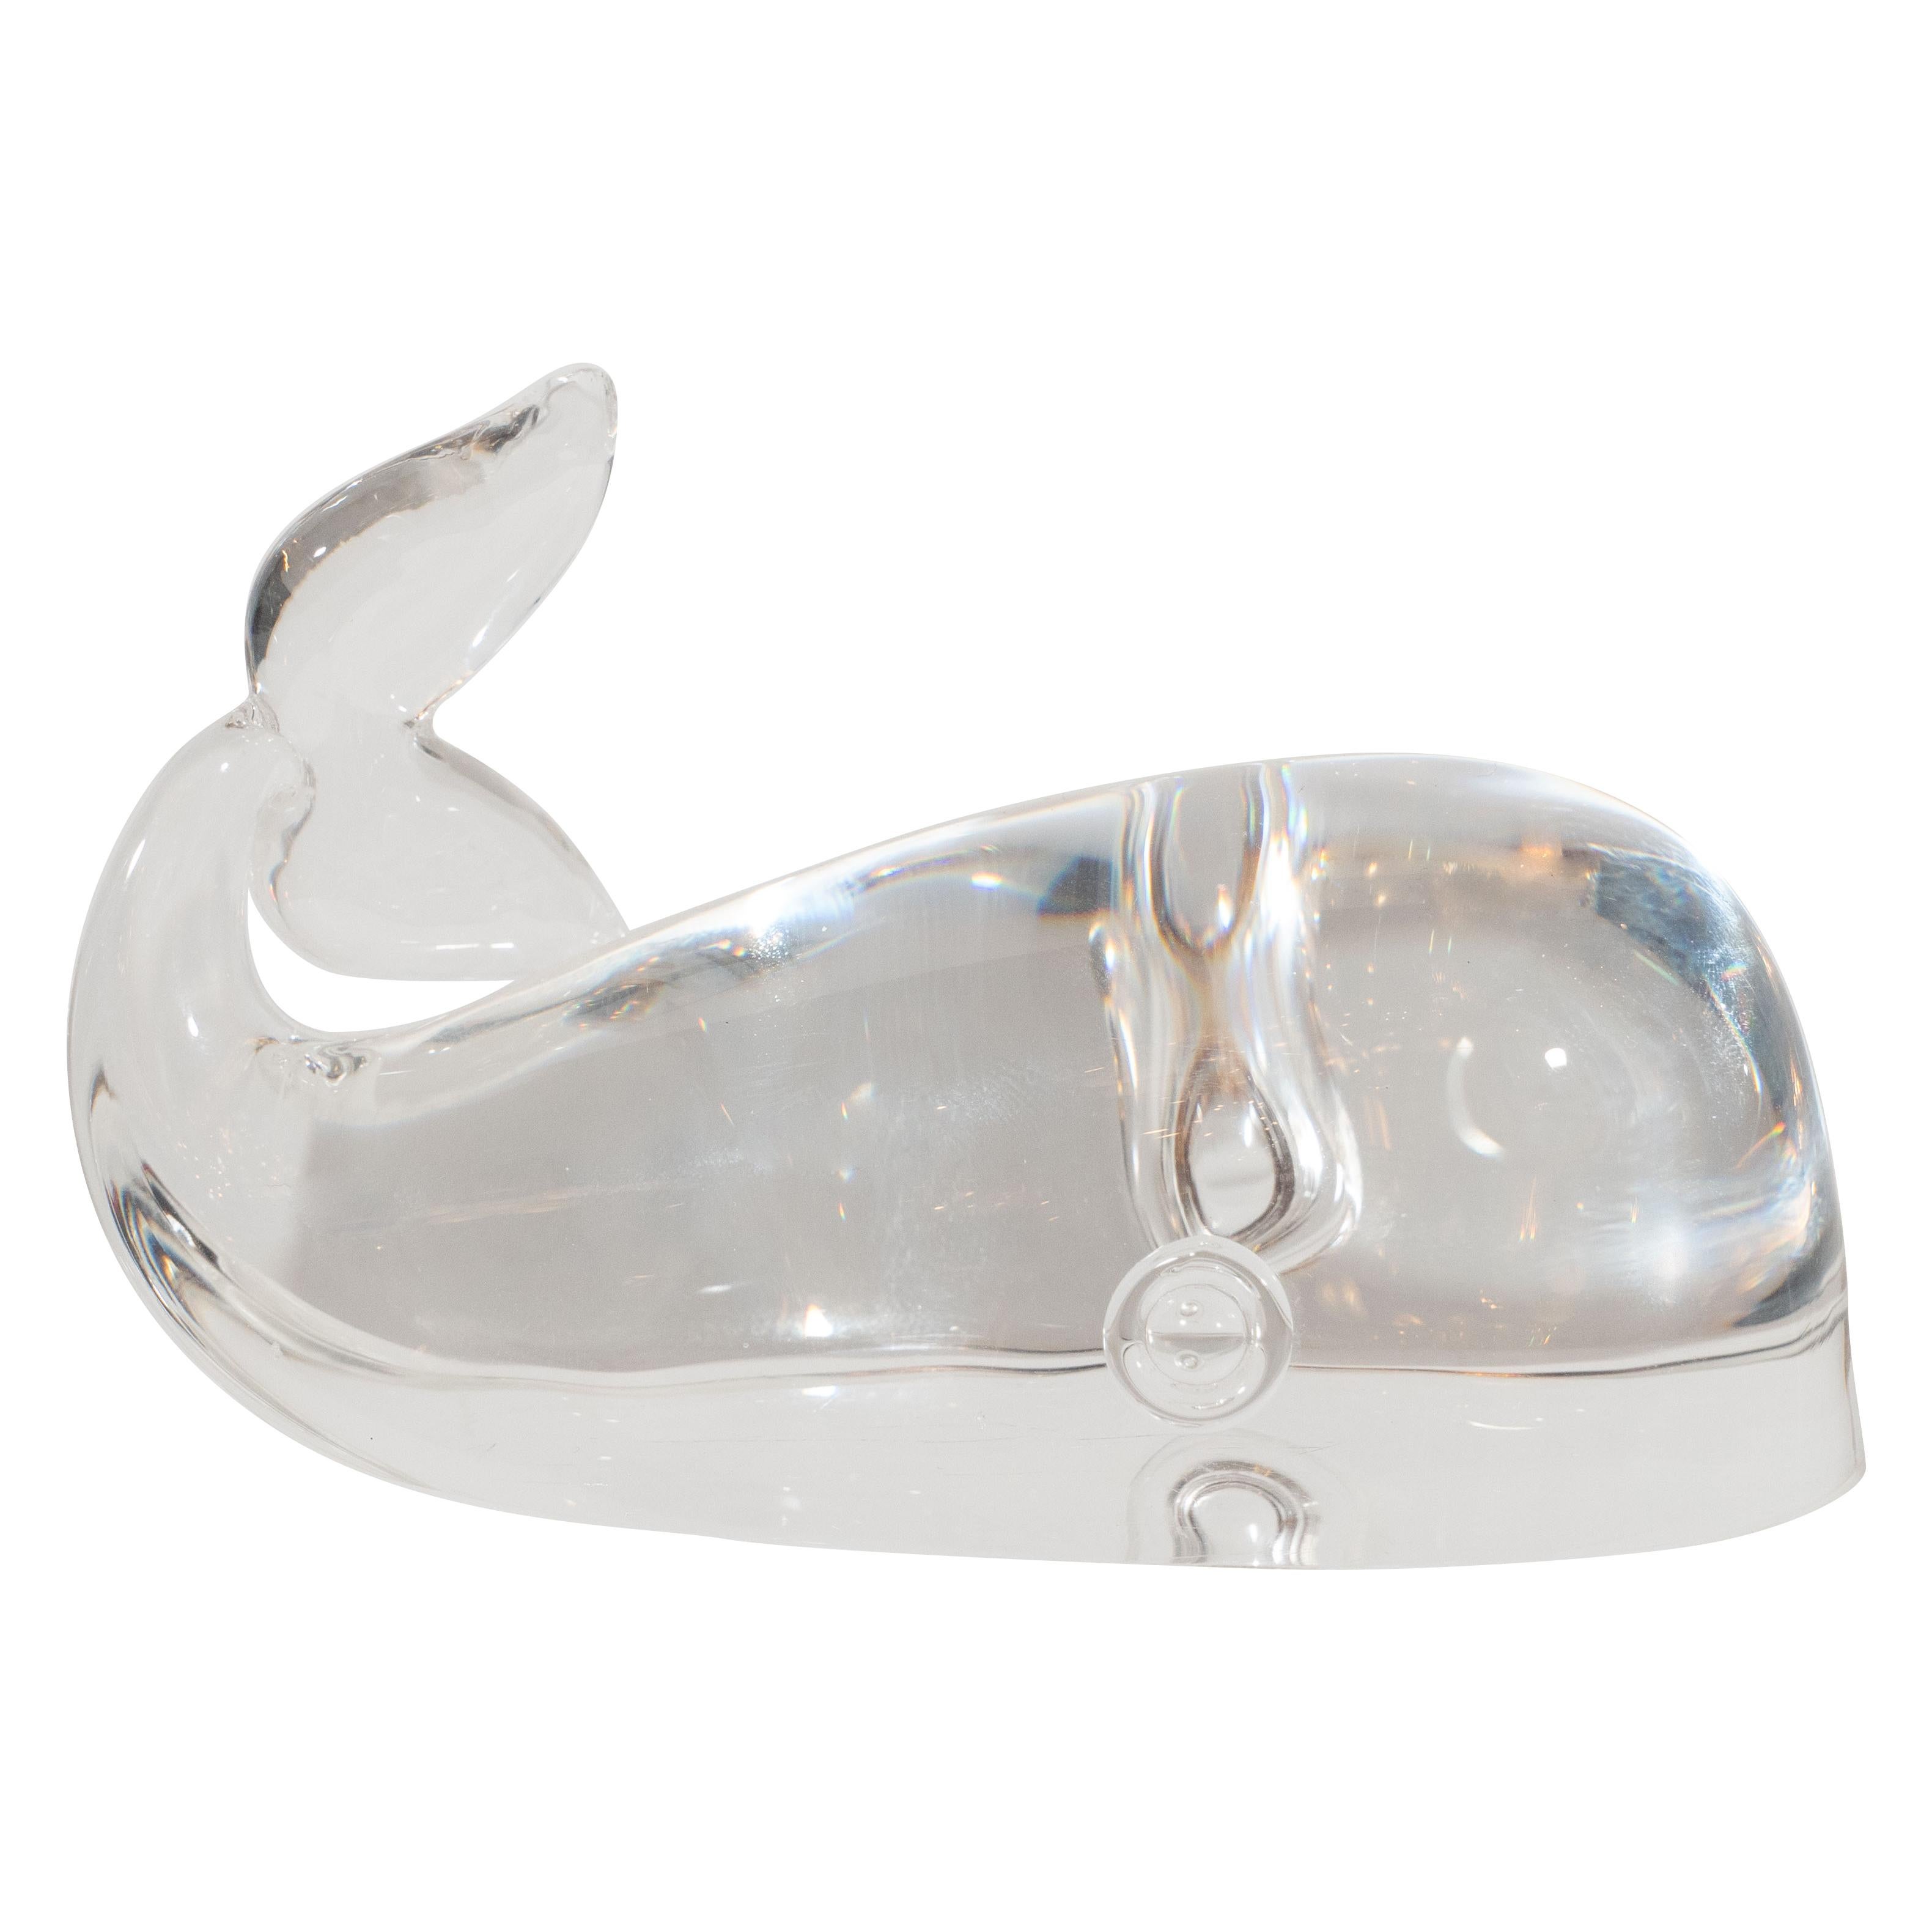 This elegant glass paperweight was created by Steuben Glass Works- one of America's premiere glass studios, since its founding in 1903-circa 1960. It offers a stylized and abstracted rendition of a Beluga whale with its notched tail curling behind